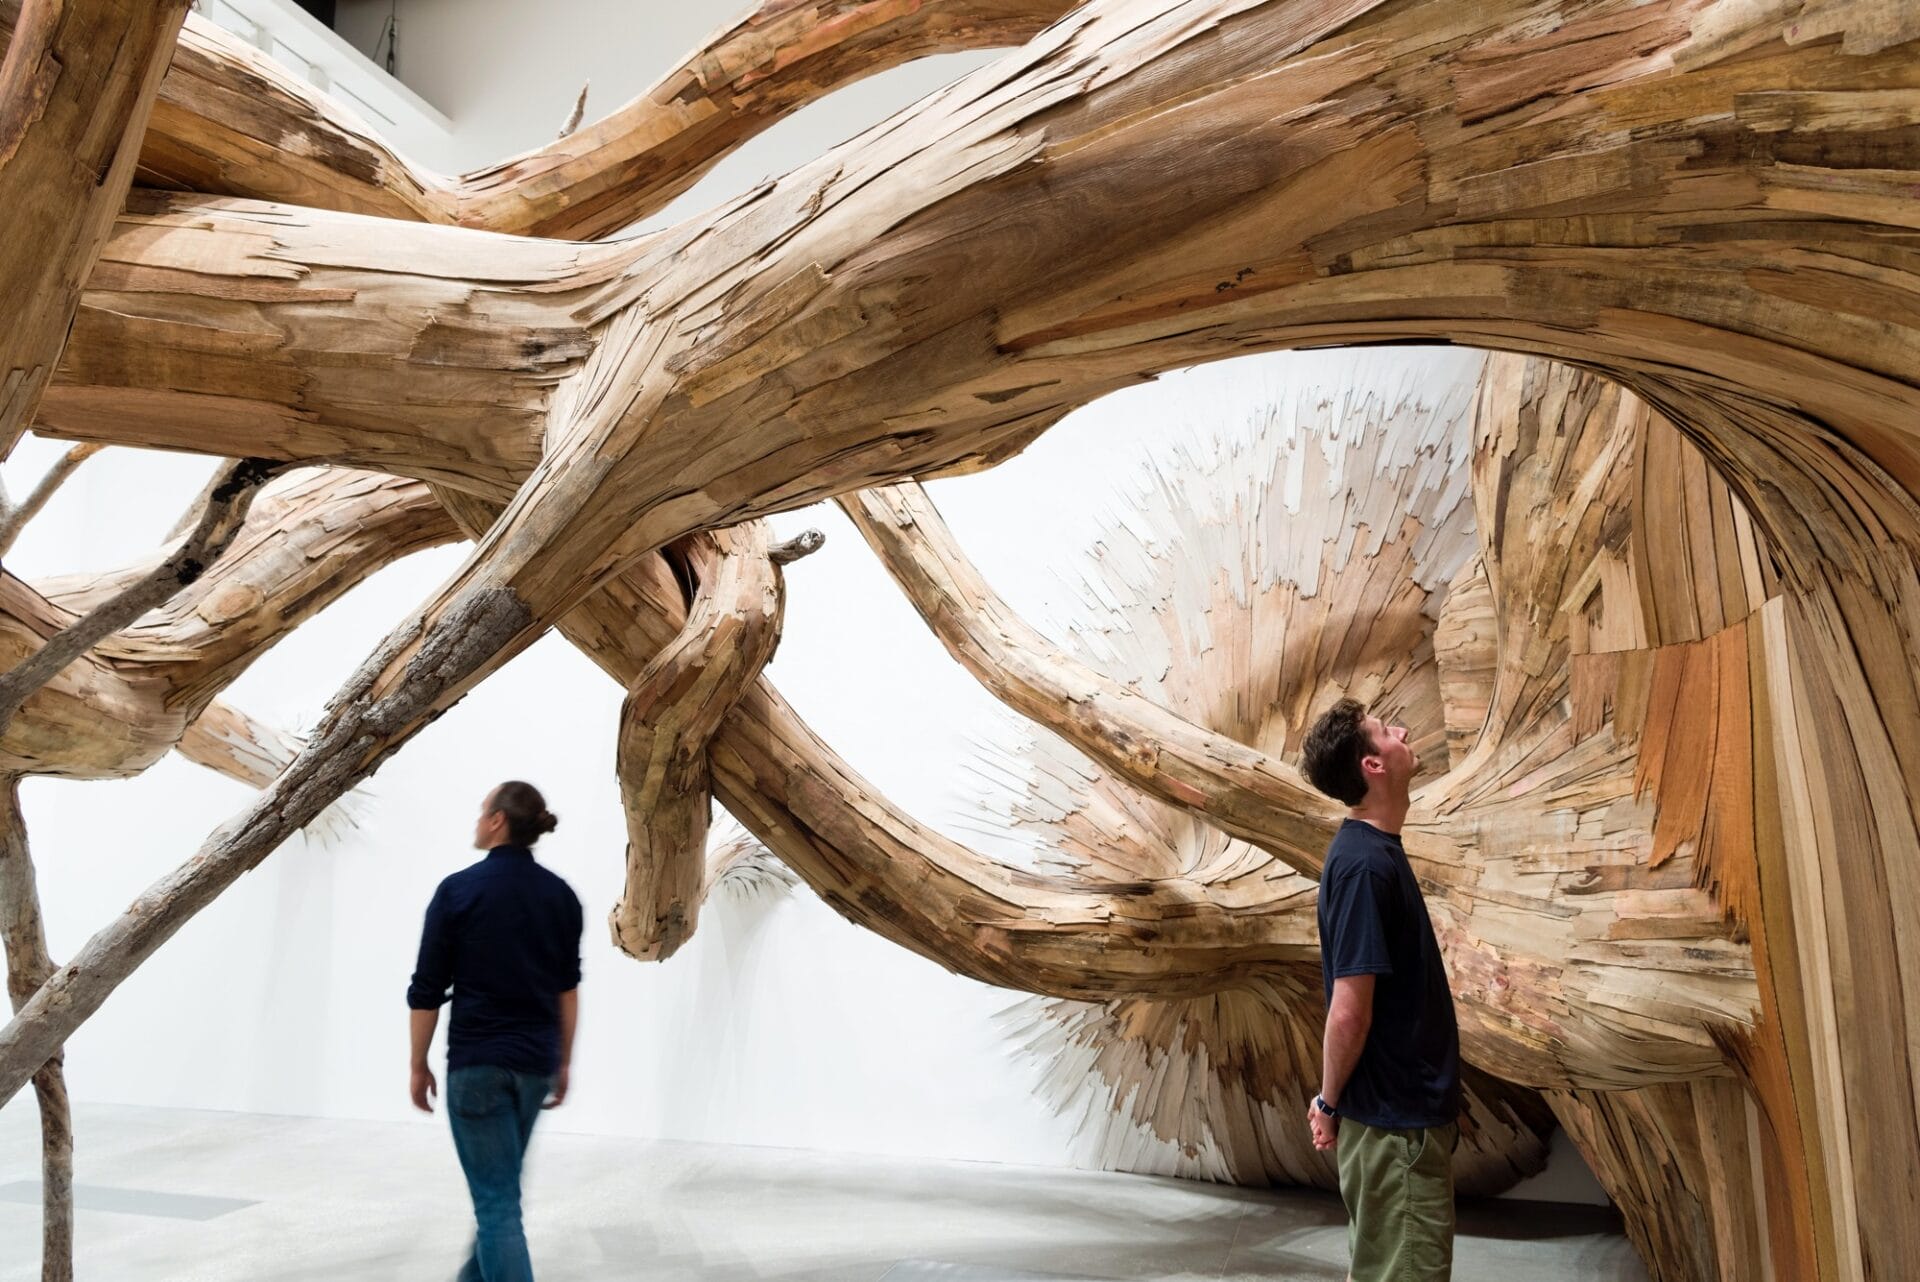 Henrique Oliveira’s Arboreal Labyrinth Ruptures the Entrance to an Enchanting Exhibition